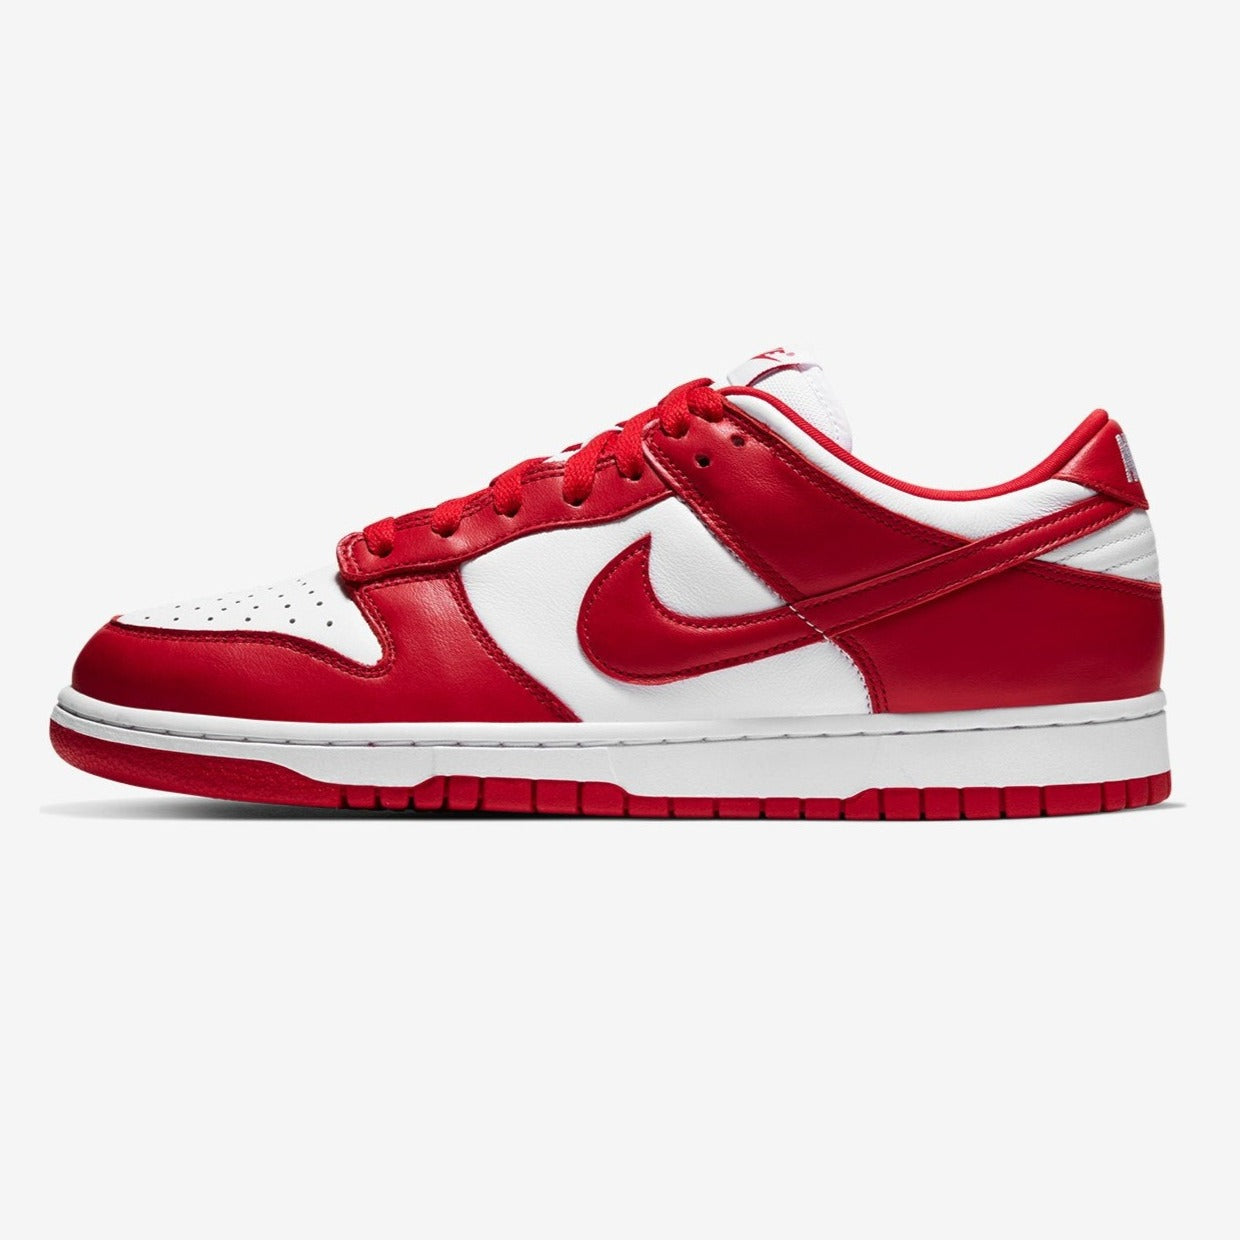 Dunk Low SP "University Red"